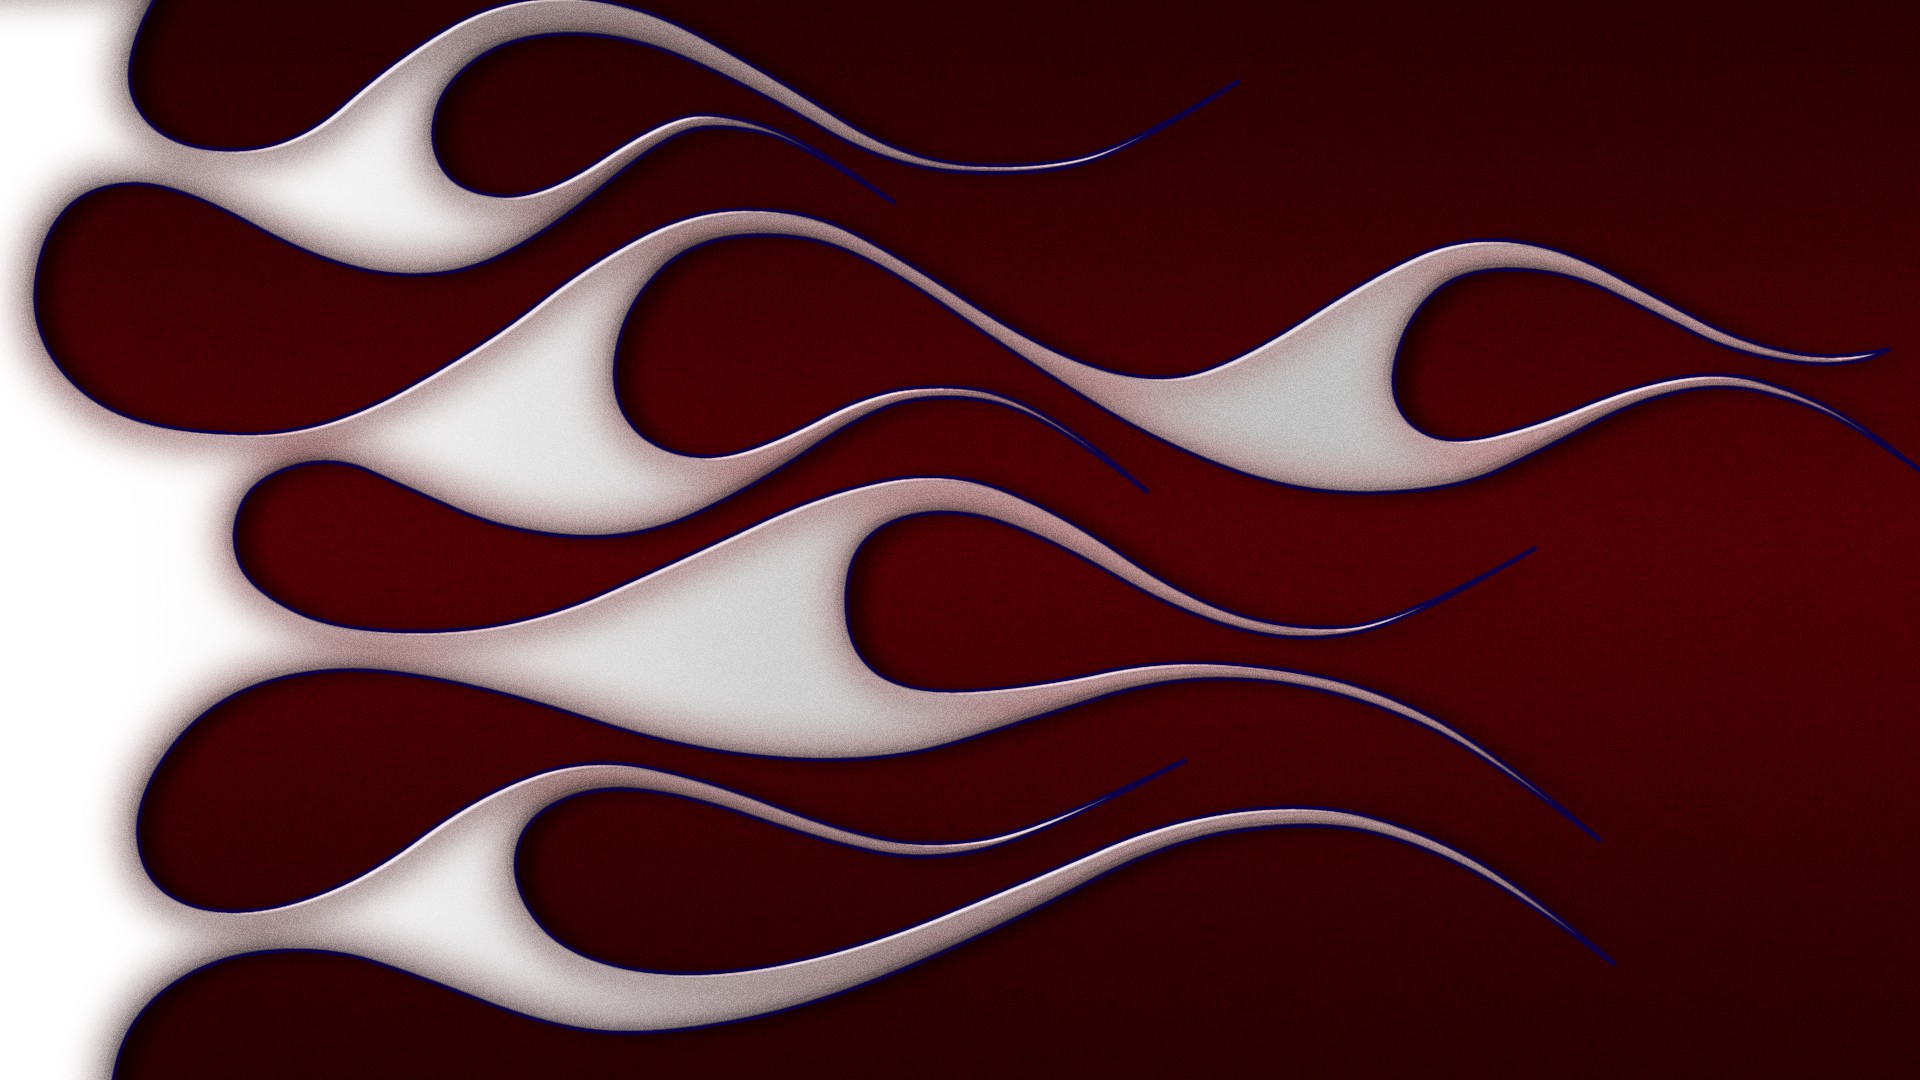 Abstract Flames Wallpaper 1920x1080 Abstract Flames Red